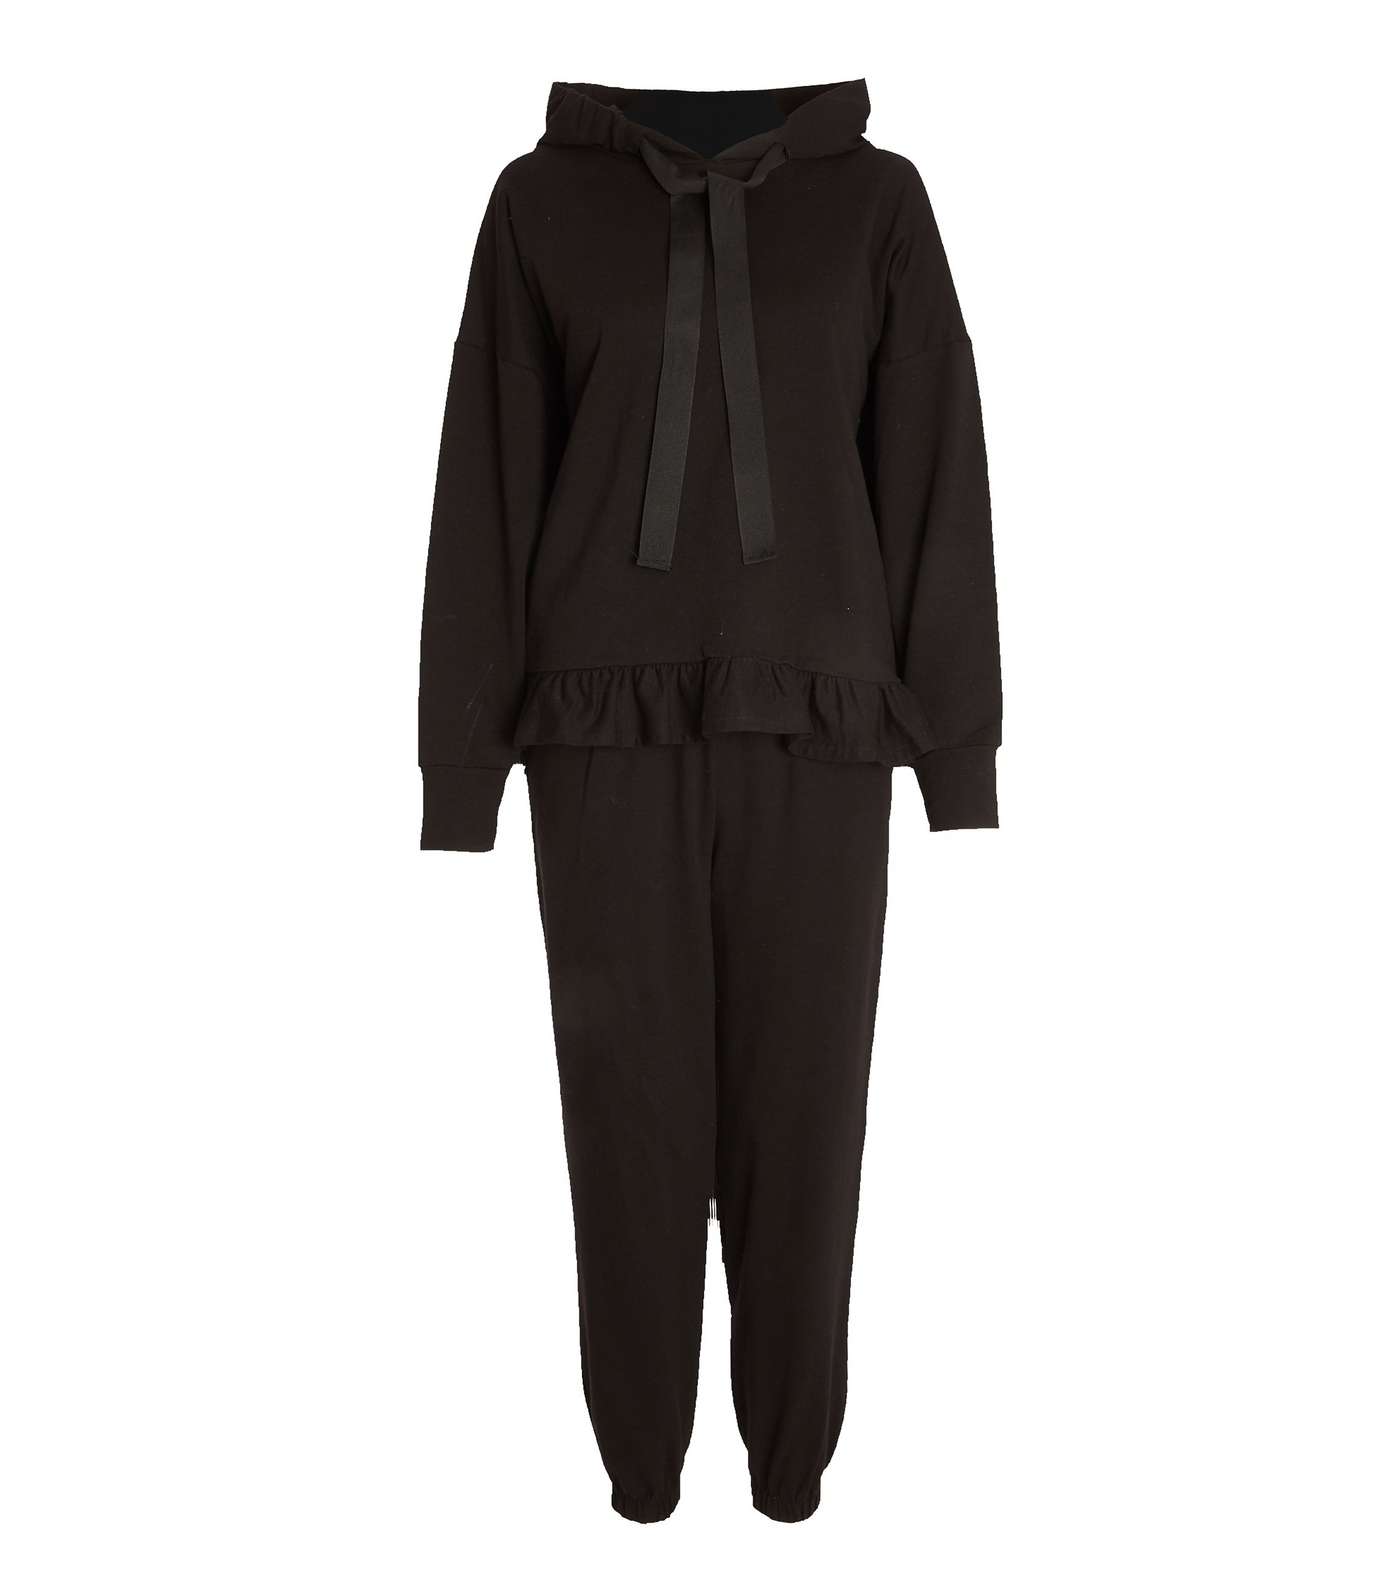 QUIZ Black Frill Hoodie and Joggers Set Image 4